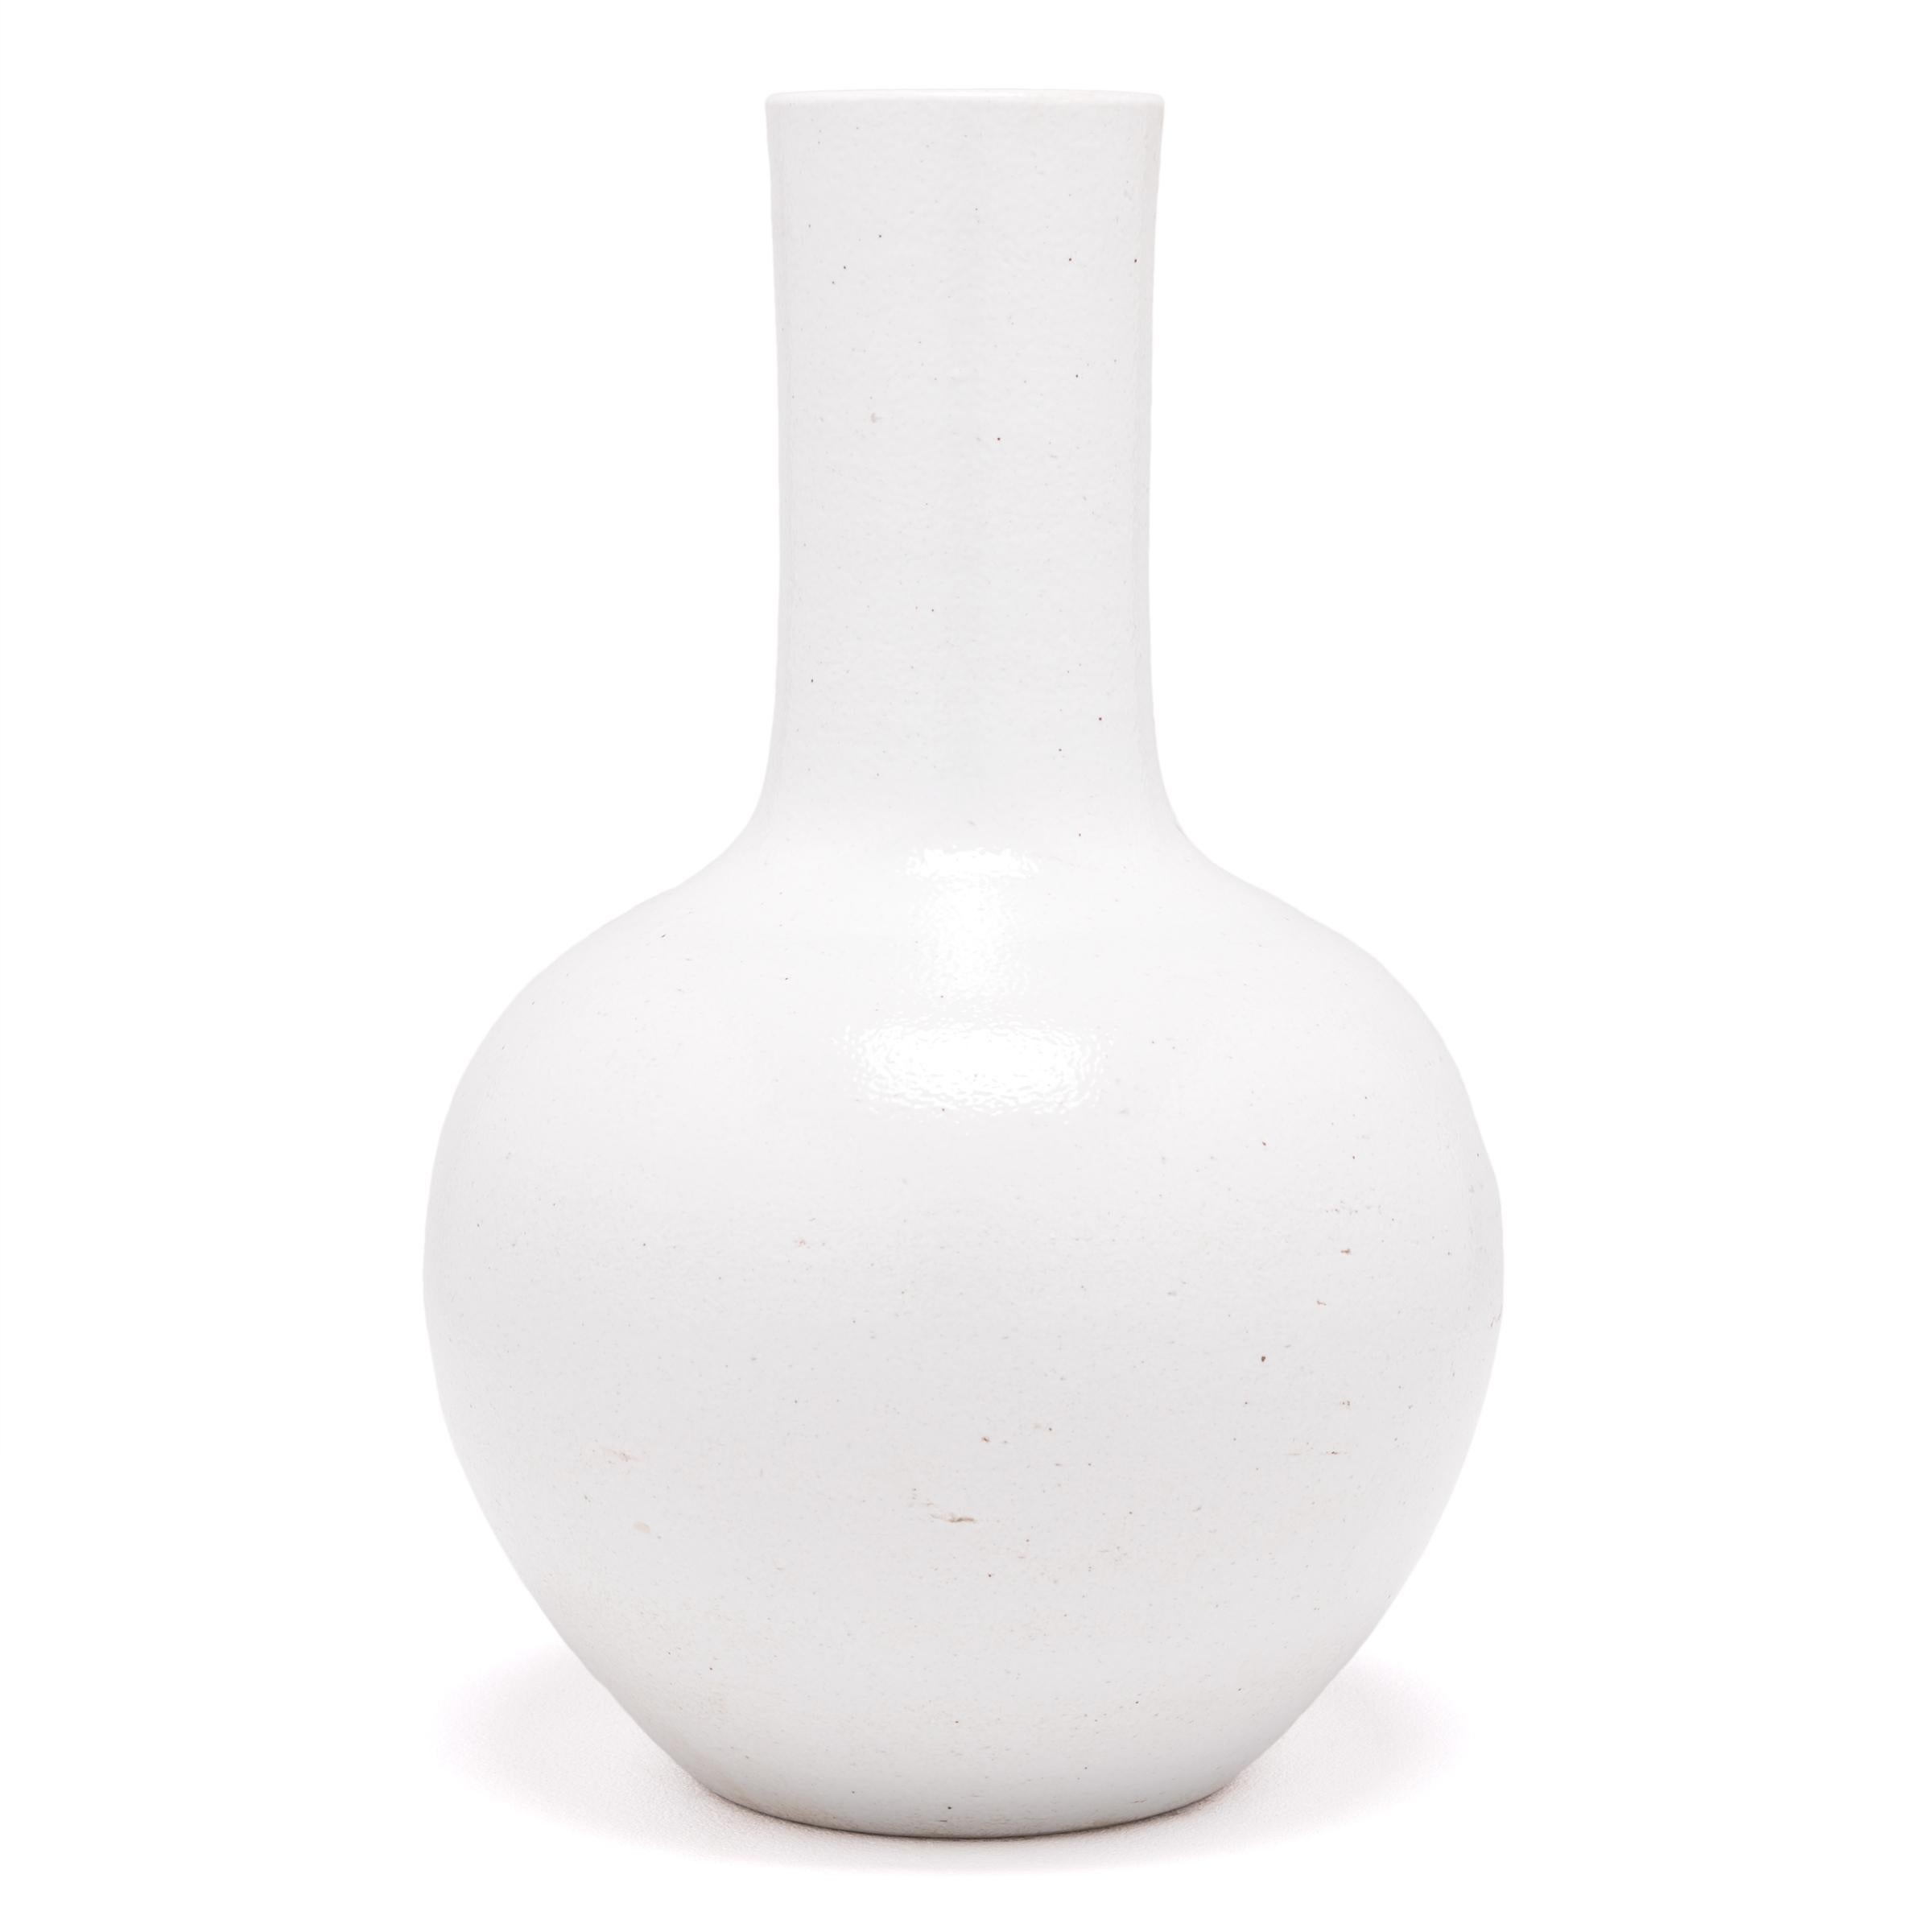 Drawing on a long Chinese tradition of ceramics, this striking long-necked vase is cloaked in an all-over milky white glaze. Sculpted by artisans in China's Jiangxi province, the vase reinterprets a traditional gooseneck shape known as a 